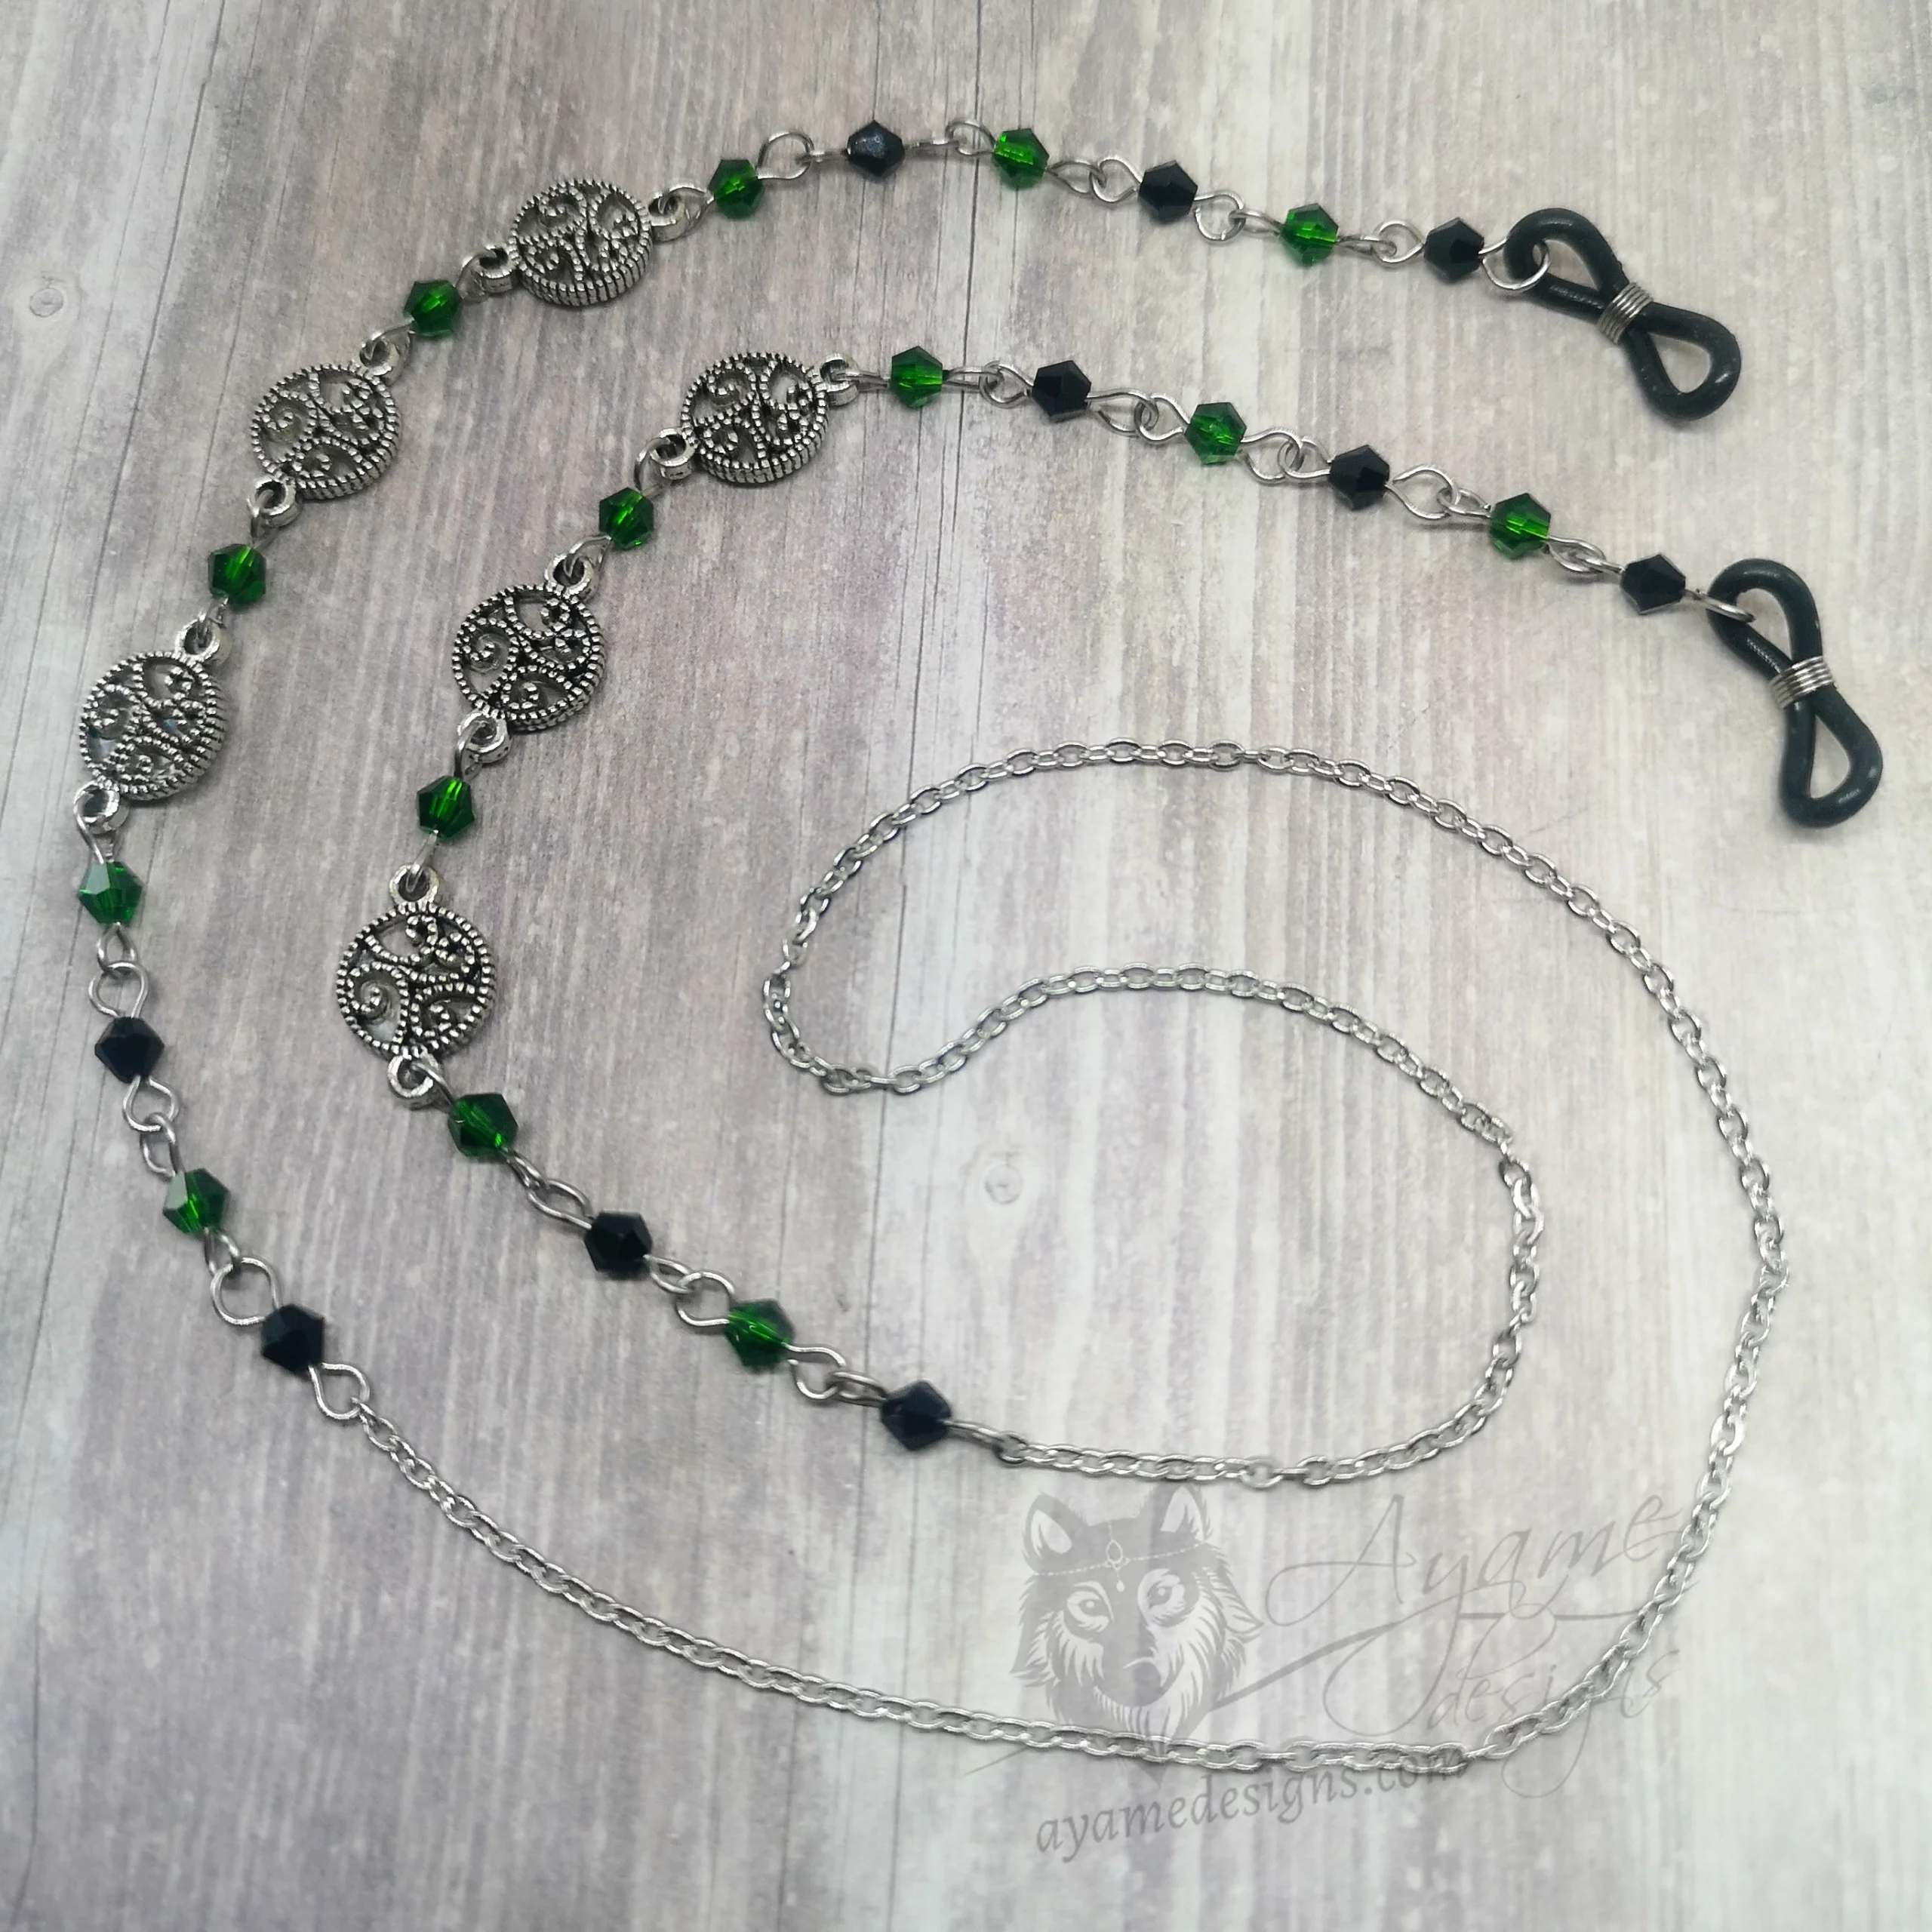 Handmade gothic glasses chain with filigree swirl charms, green and black Austrian crystal beads and stainless steel chain